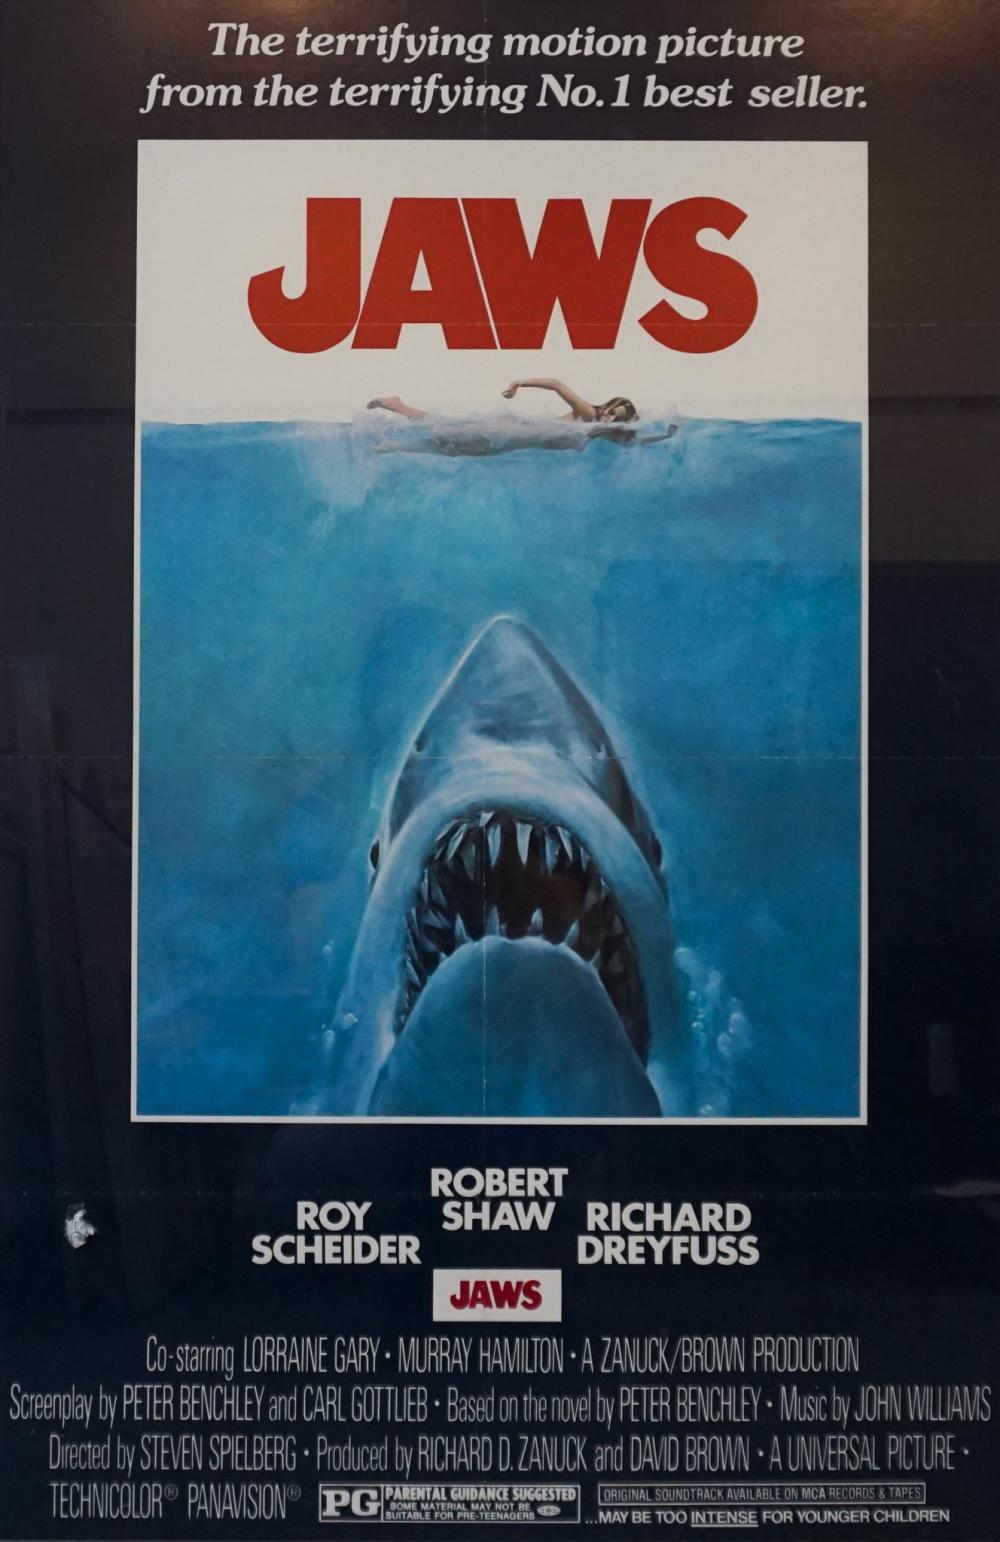  JAWS REPRODUCTION POSTER FRAME  32bb9f